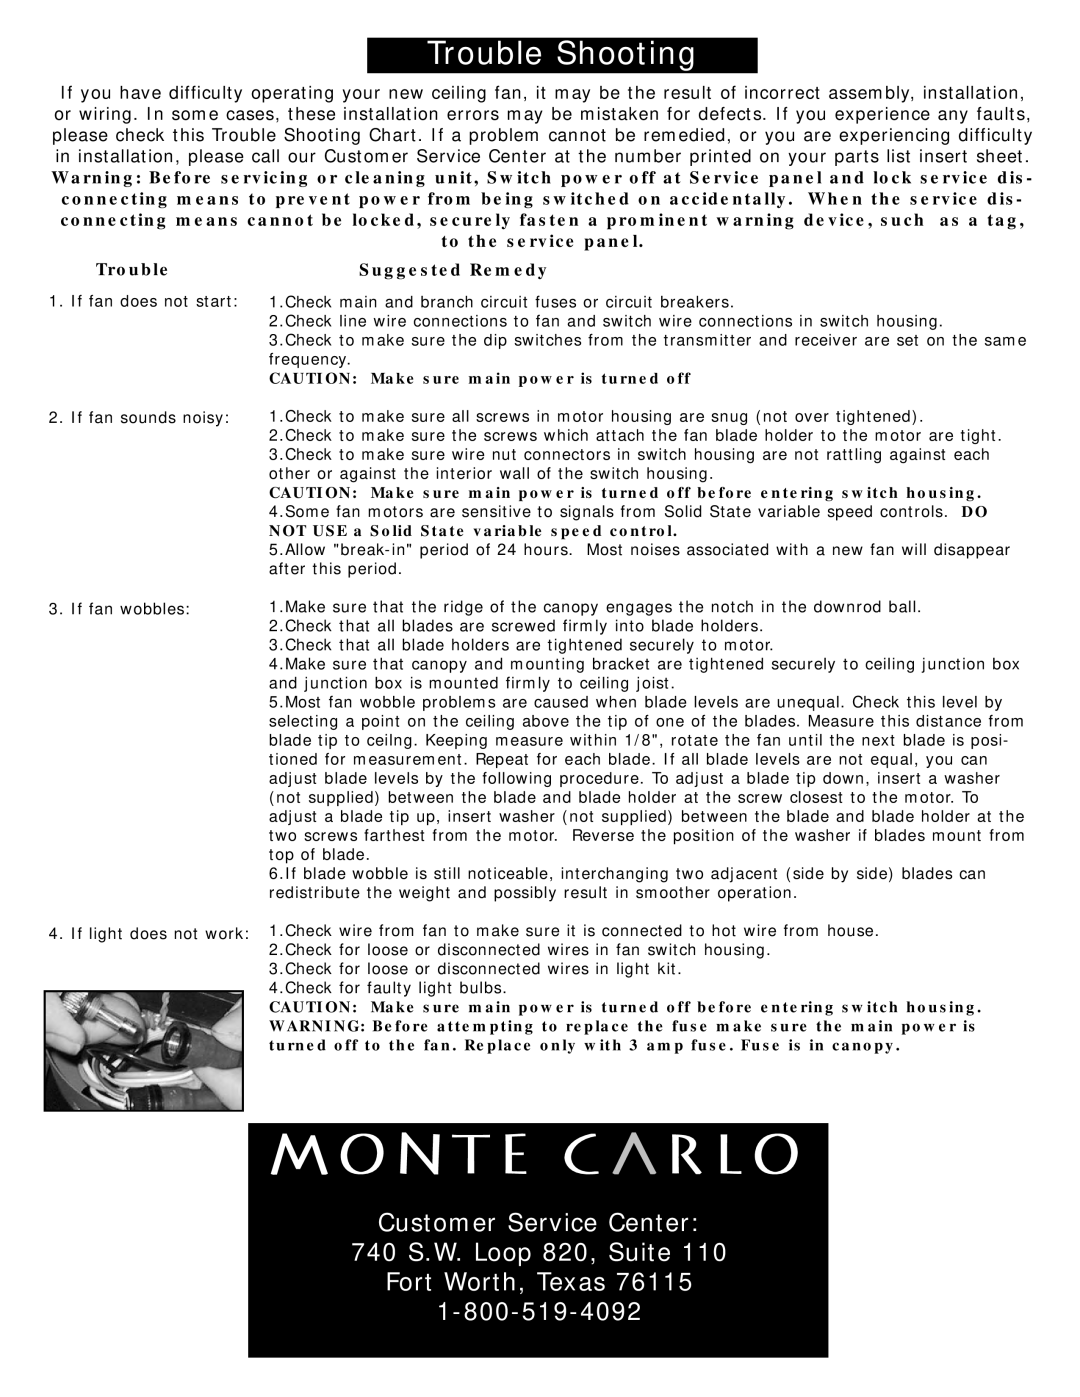 Monte Carlo Fan Company 5SWR54XXD Series owner manual CAUTION Make sure main power is turned off, Suggested Remedy 